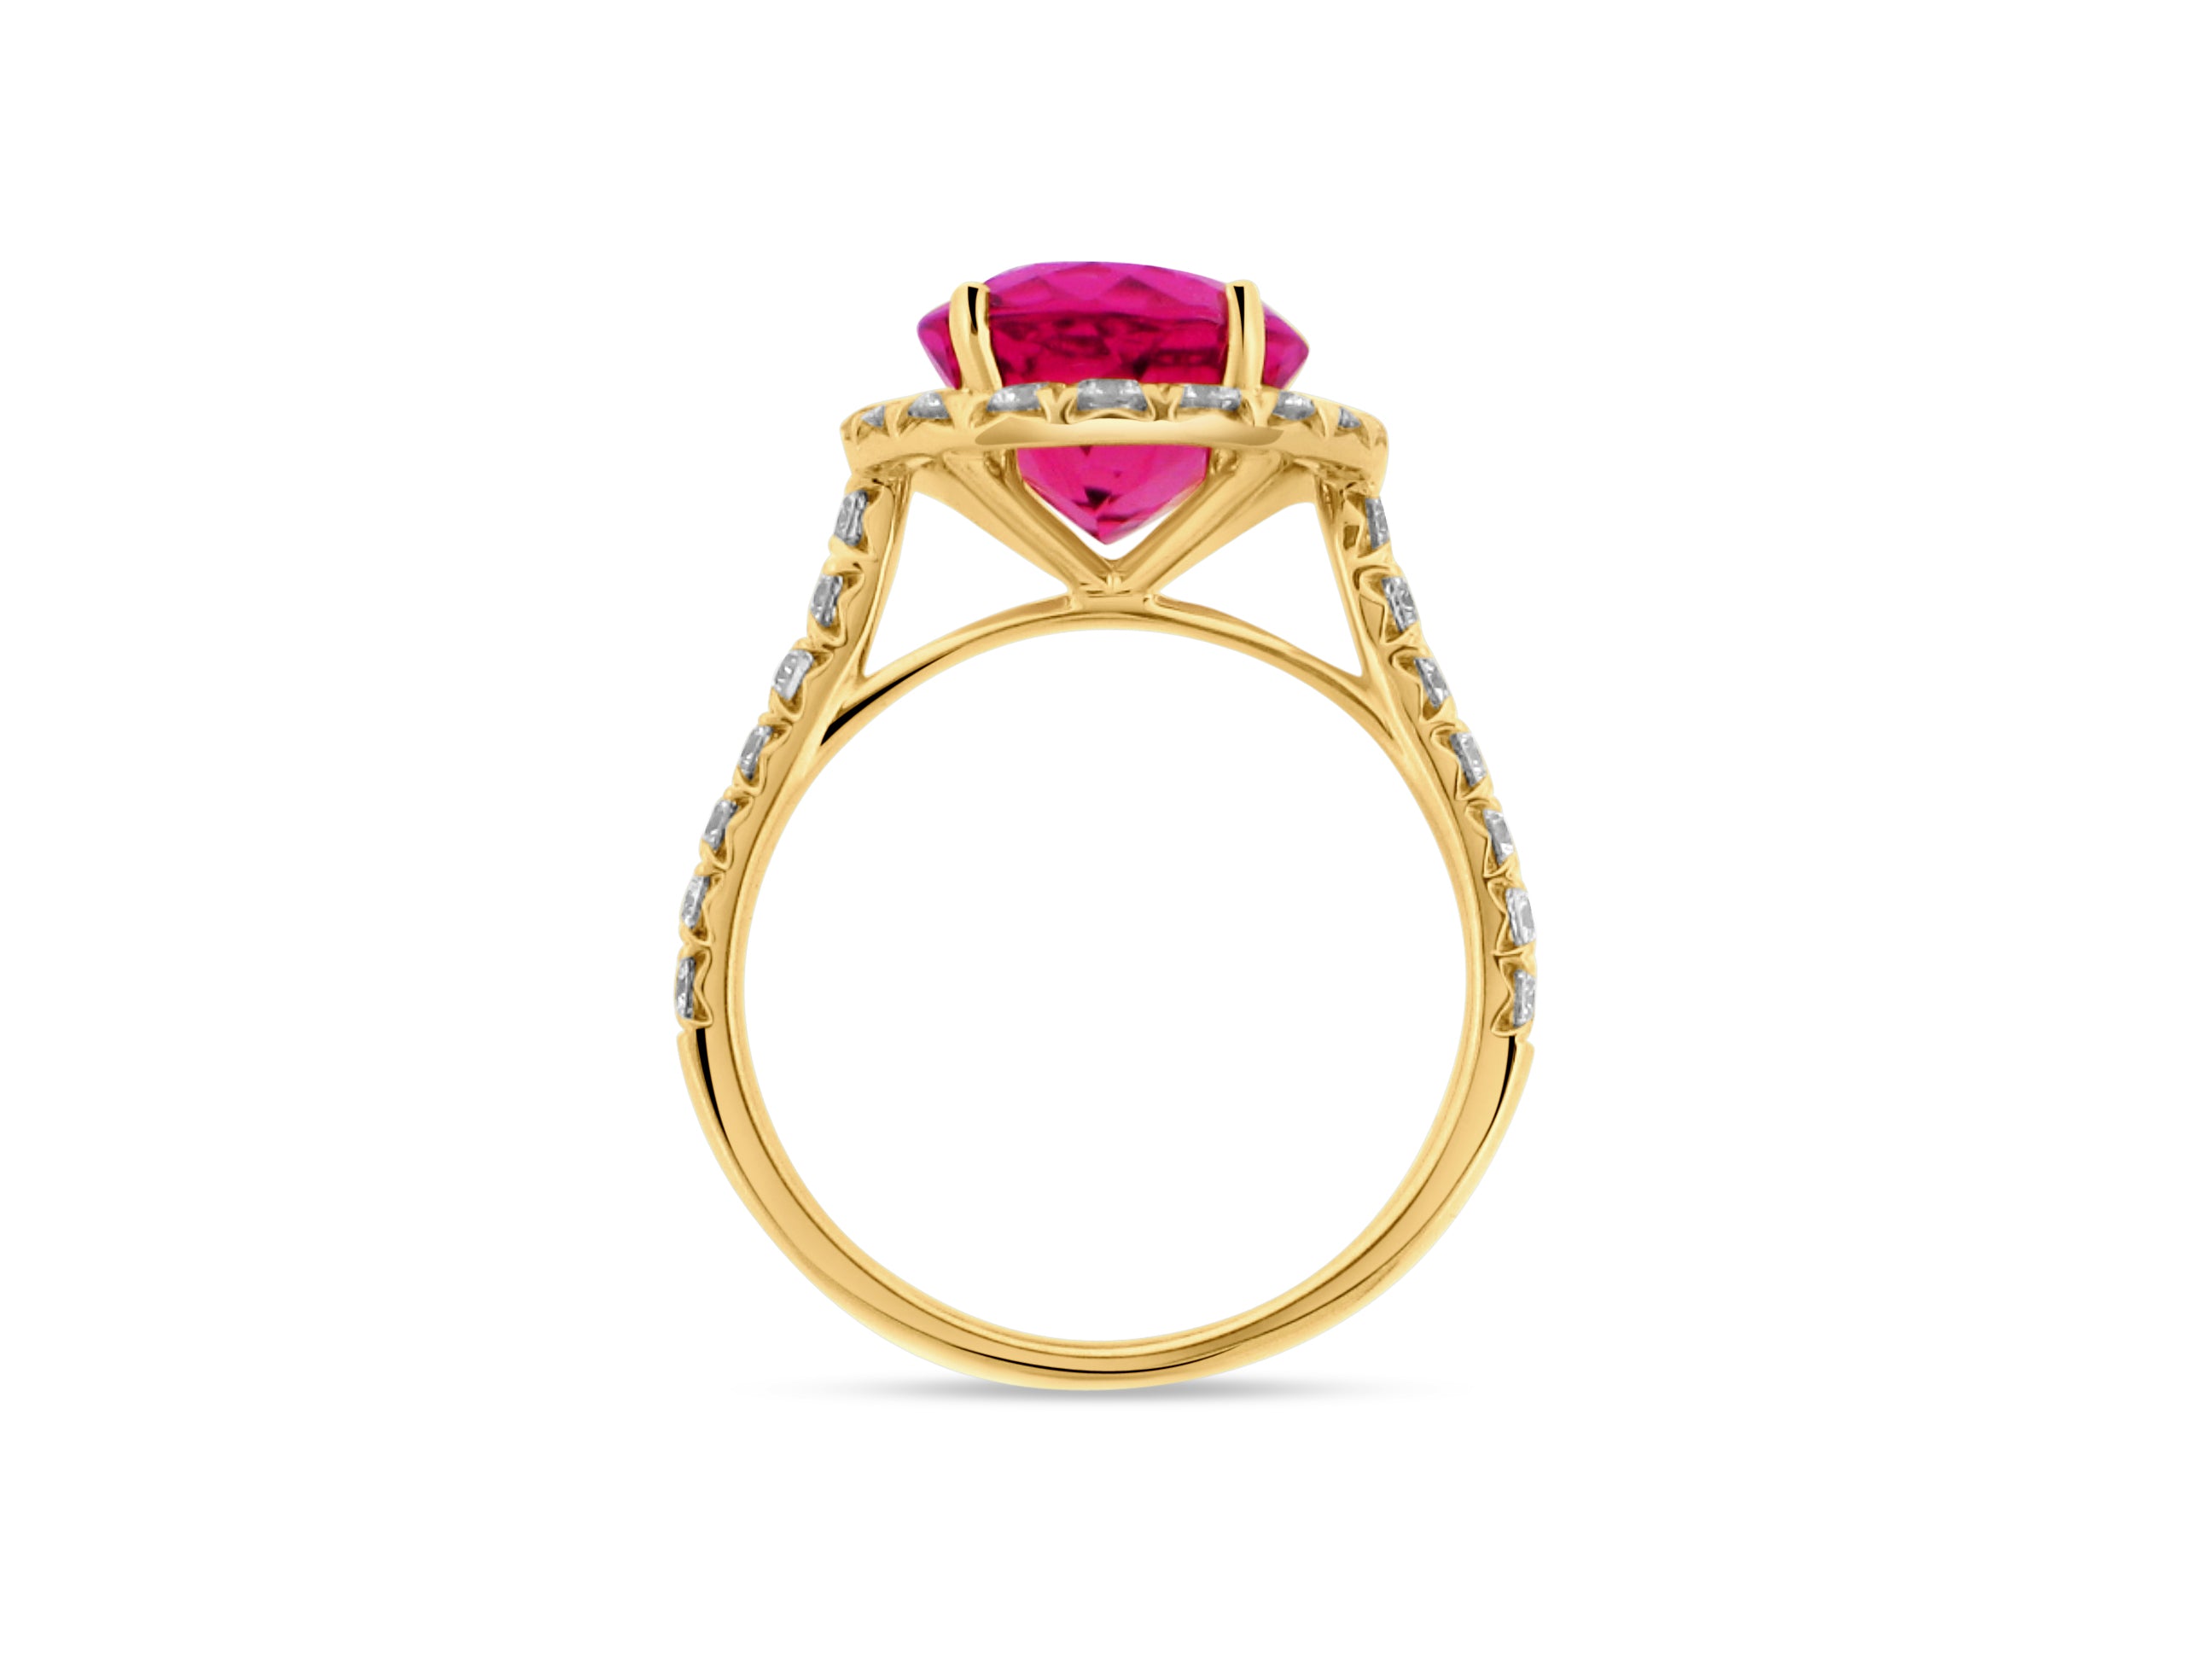 PRIVE 18K YELLOW GOLD  3.91CT A+  PINK TOURMALINE OVAL .88CT VS/G ACCENT NATURAL DIAMONDS